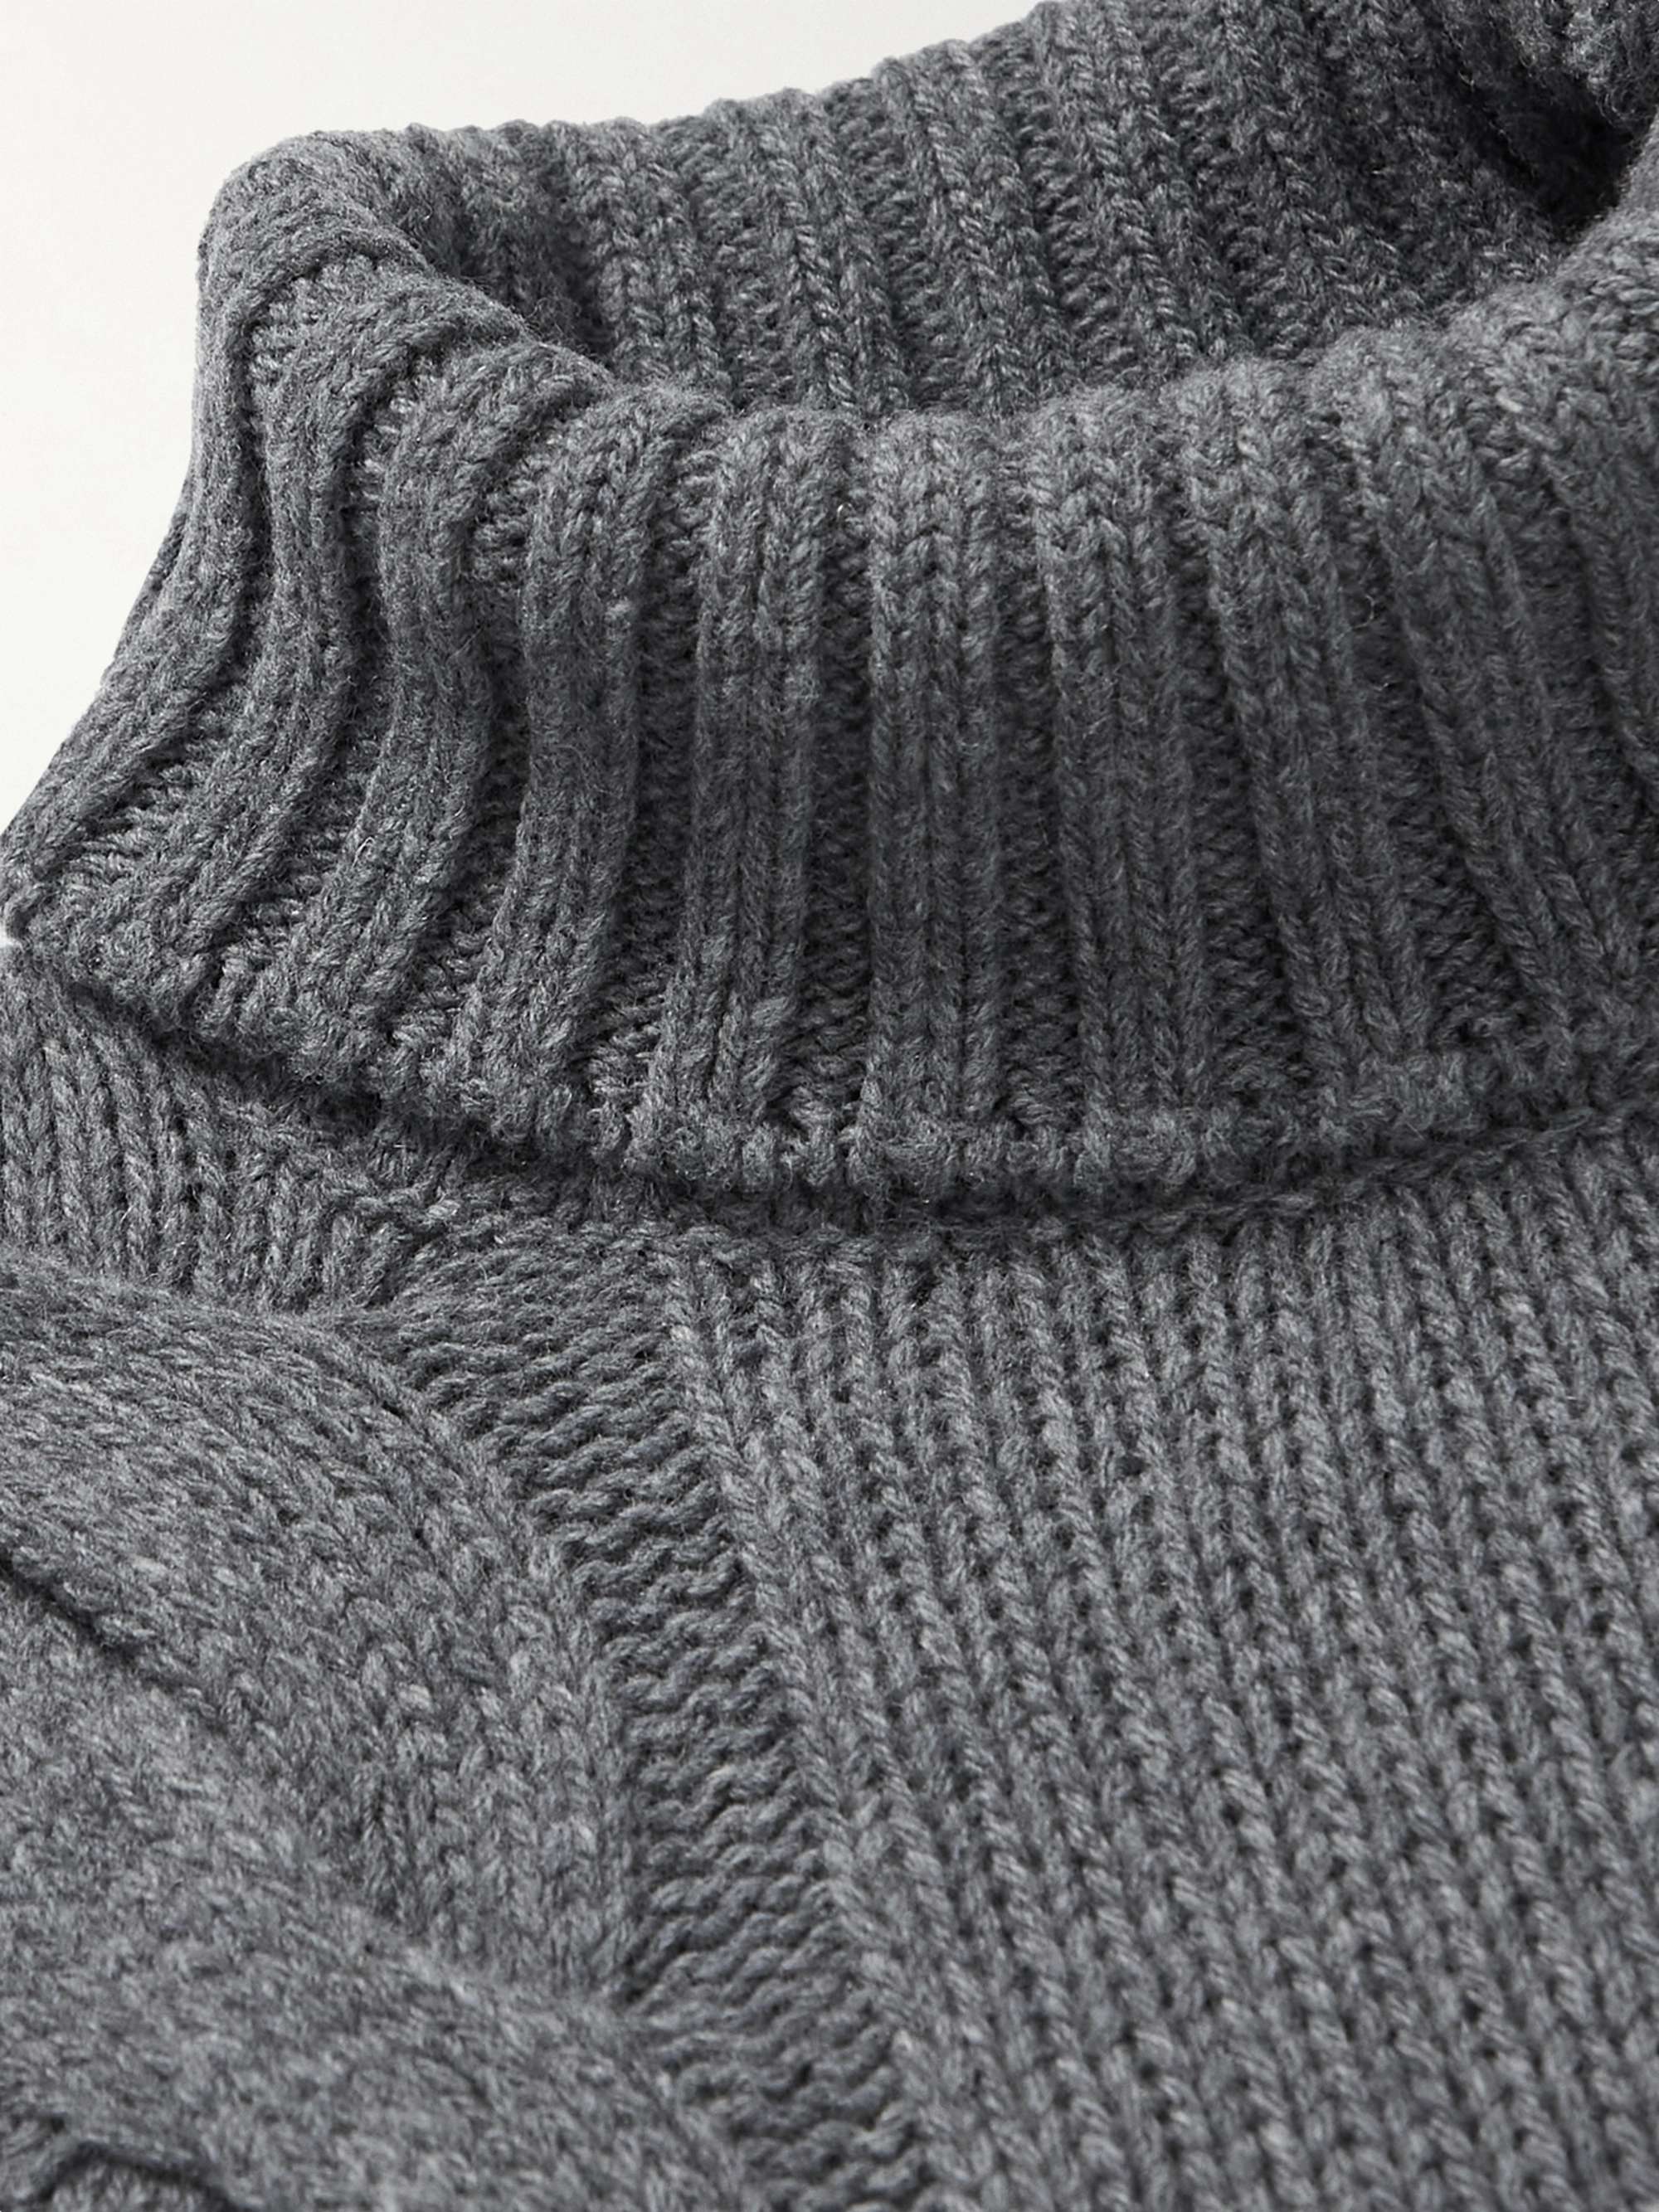 ANDERSON & SHEPPARD Slim-Fit Cable-Knit Merino Wool Rollneck Sweater